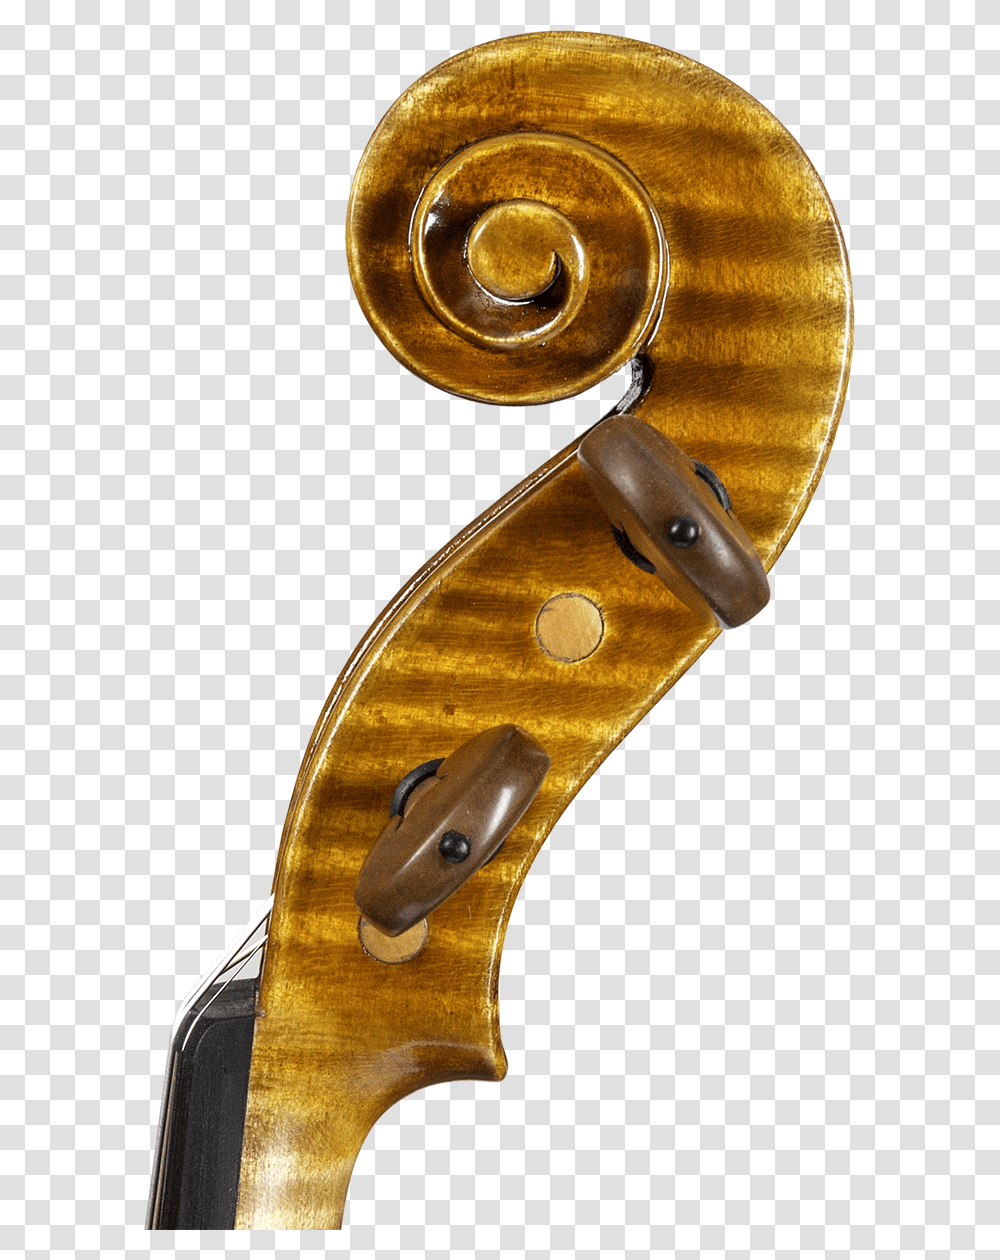 Violin, Musical Instrument, Cello, Wood, Lute Transparent Png